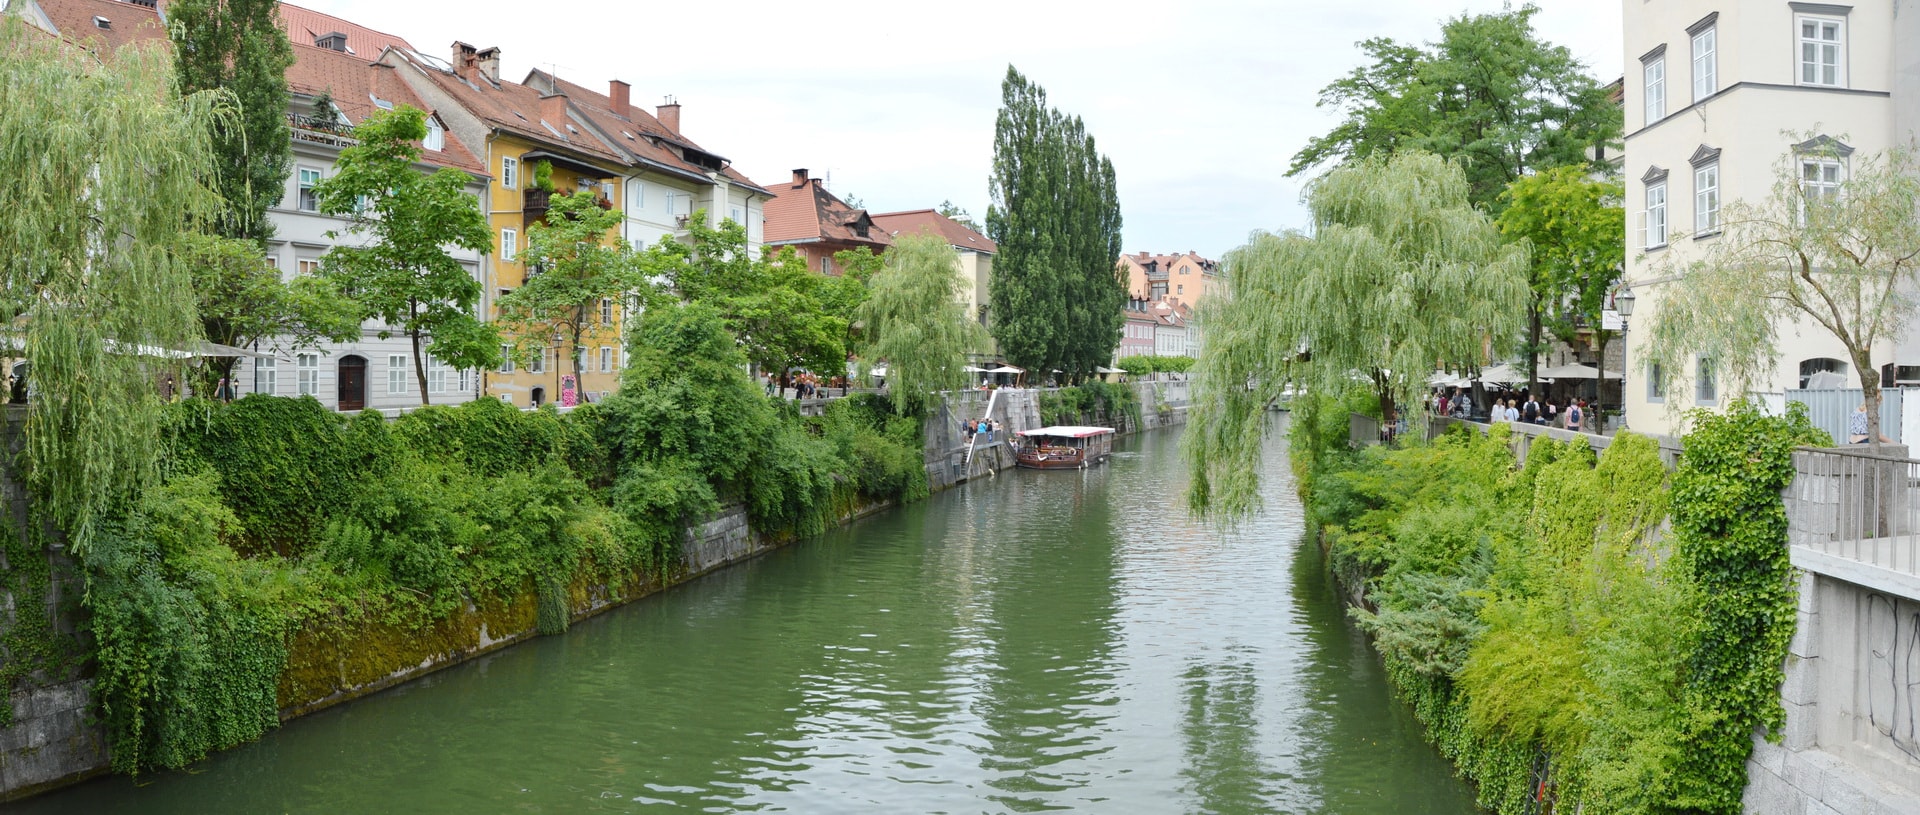 Ljubljanica River in the city centre is lined with greenery